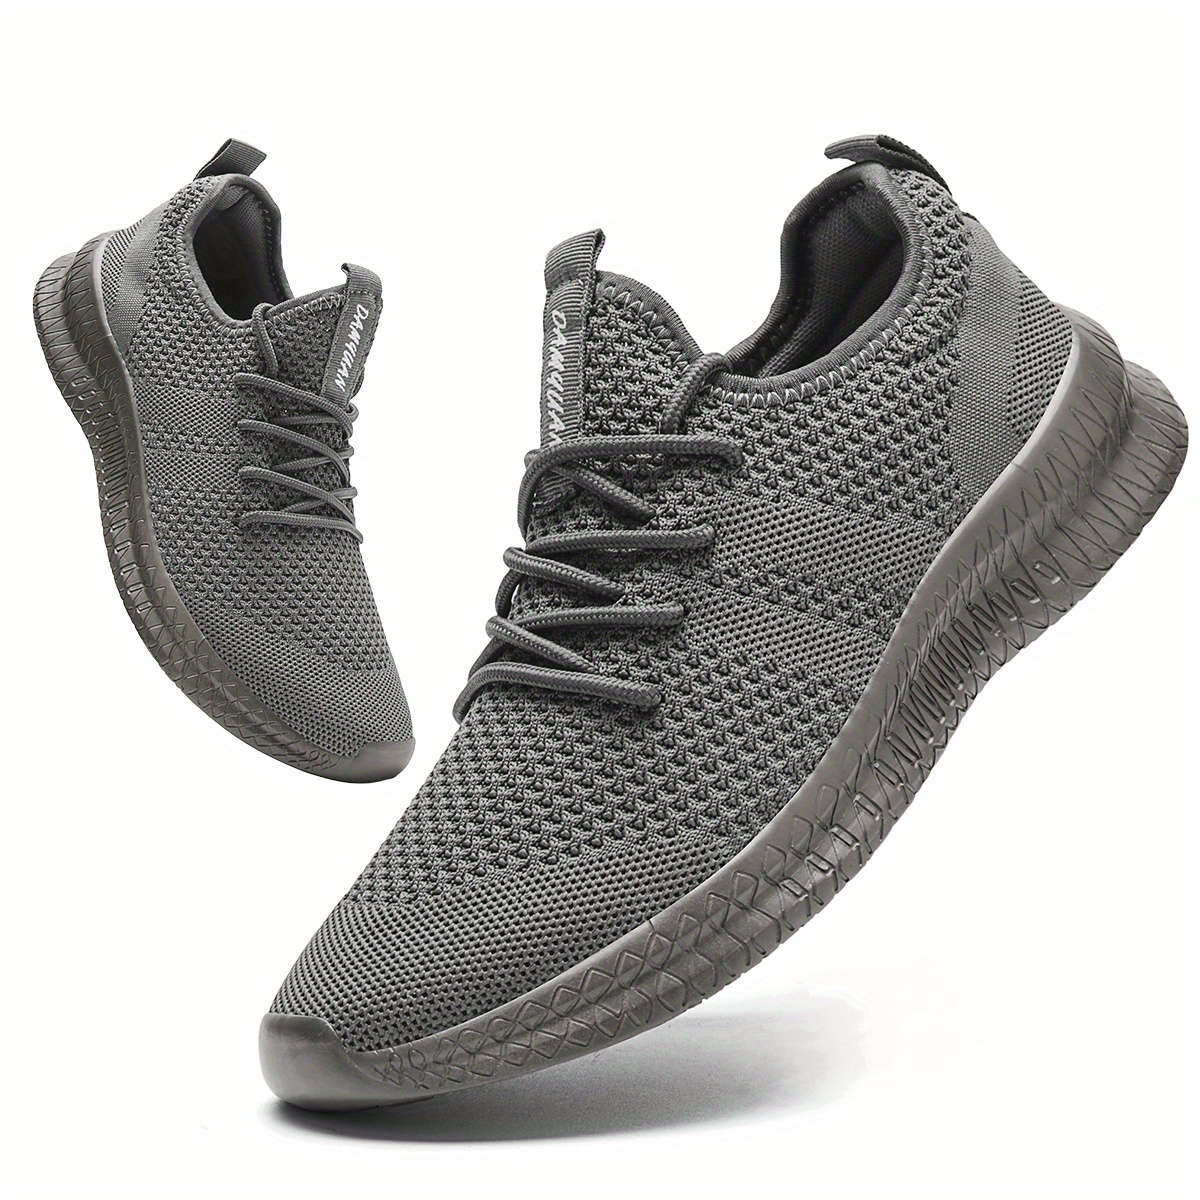 Men Running Shoes Lace up Men Sport Shoes Lightweight Comfortable Breathable  Walking Sneakers Tenis Masculino Zapatillas Hombre Color: Dark Grey, Shoe  Size: 44